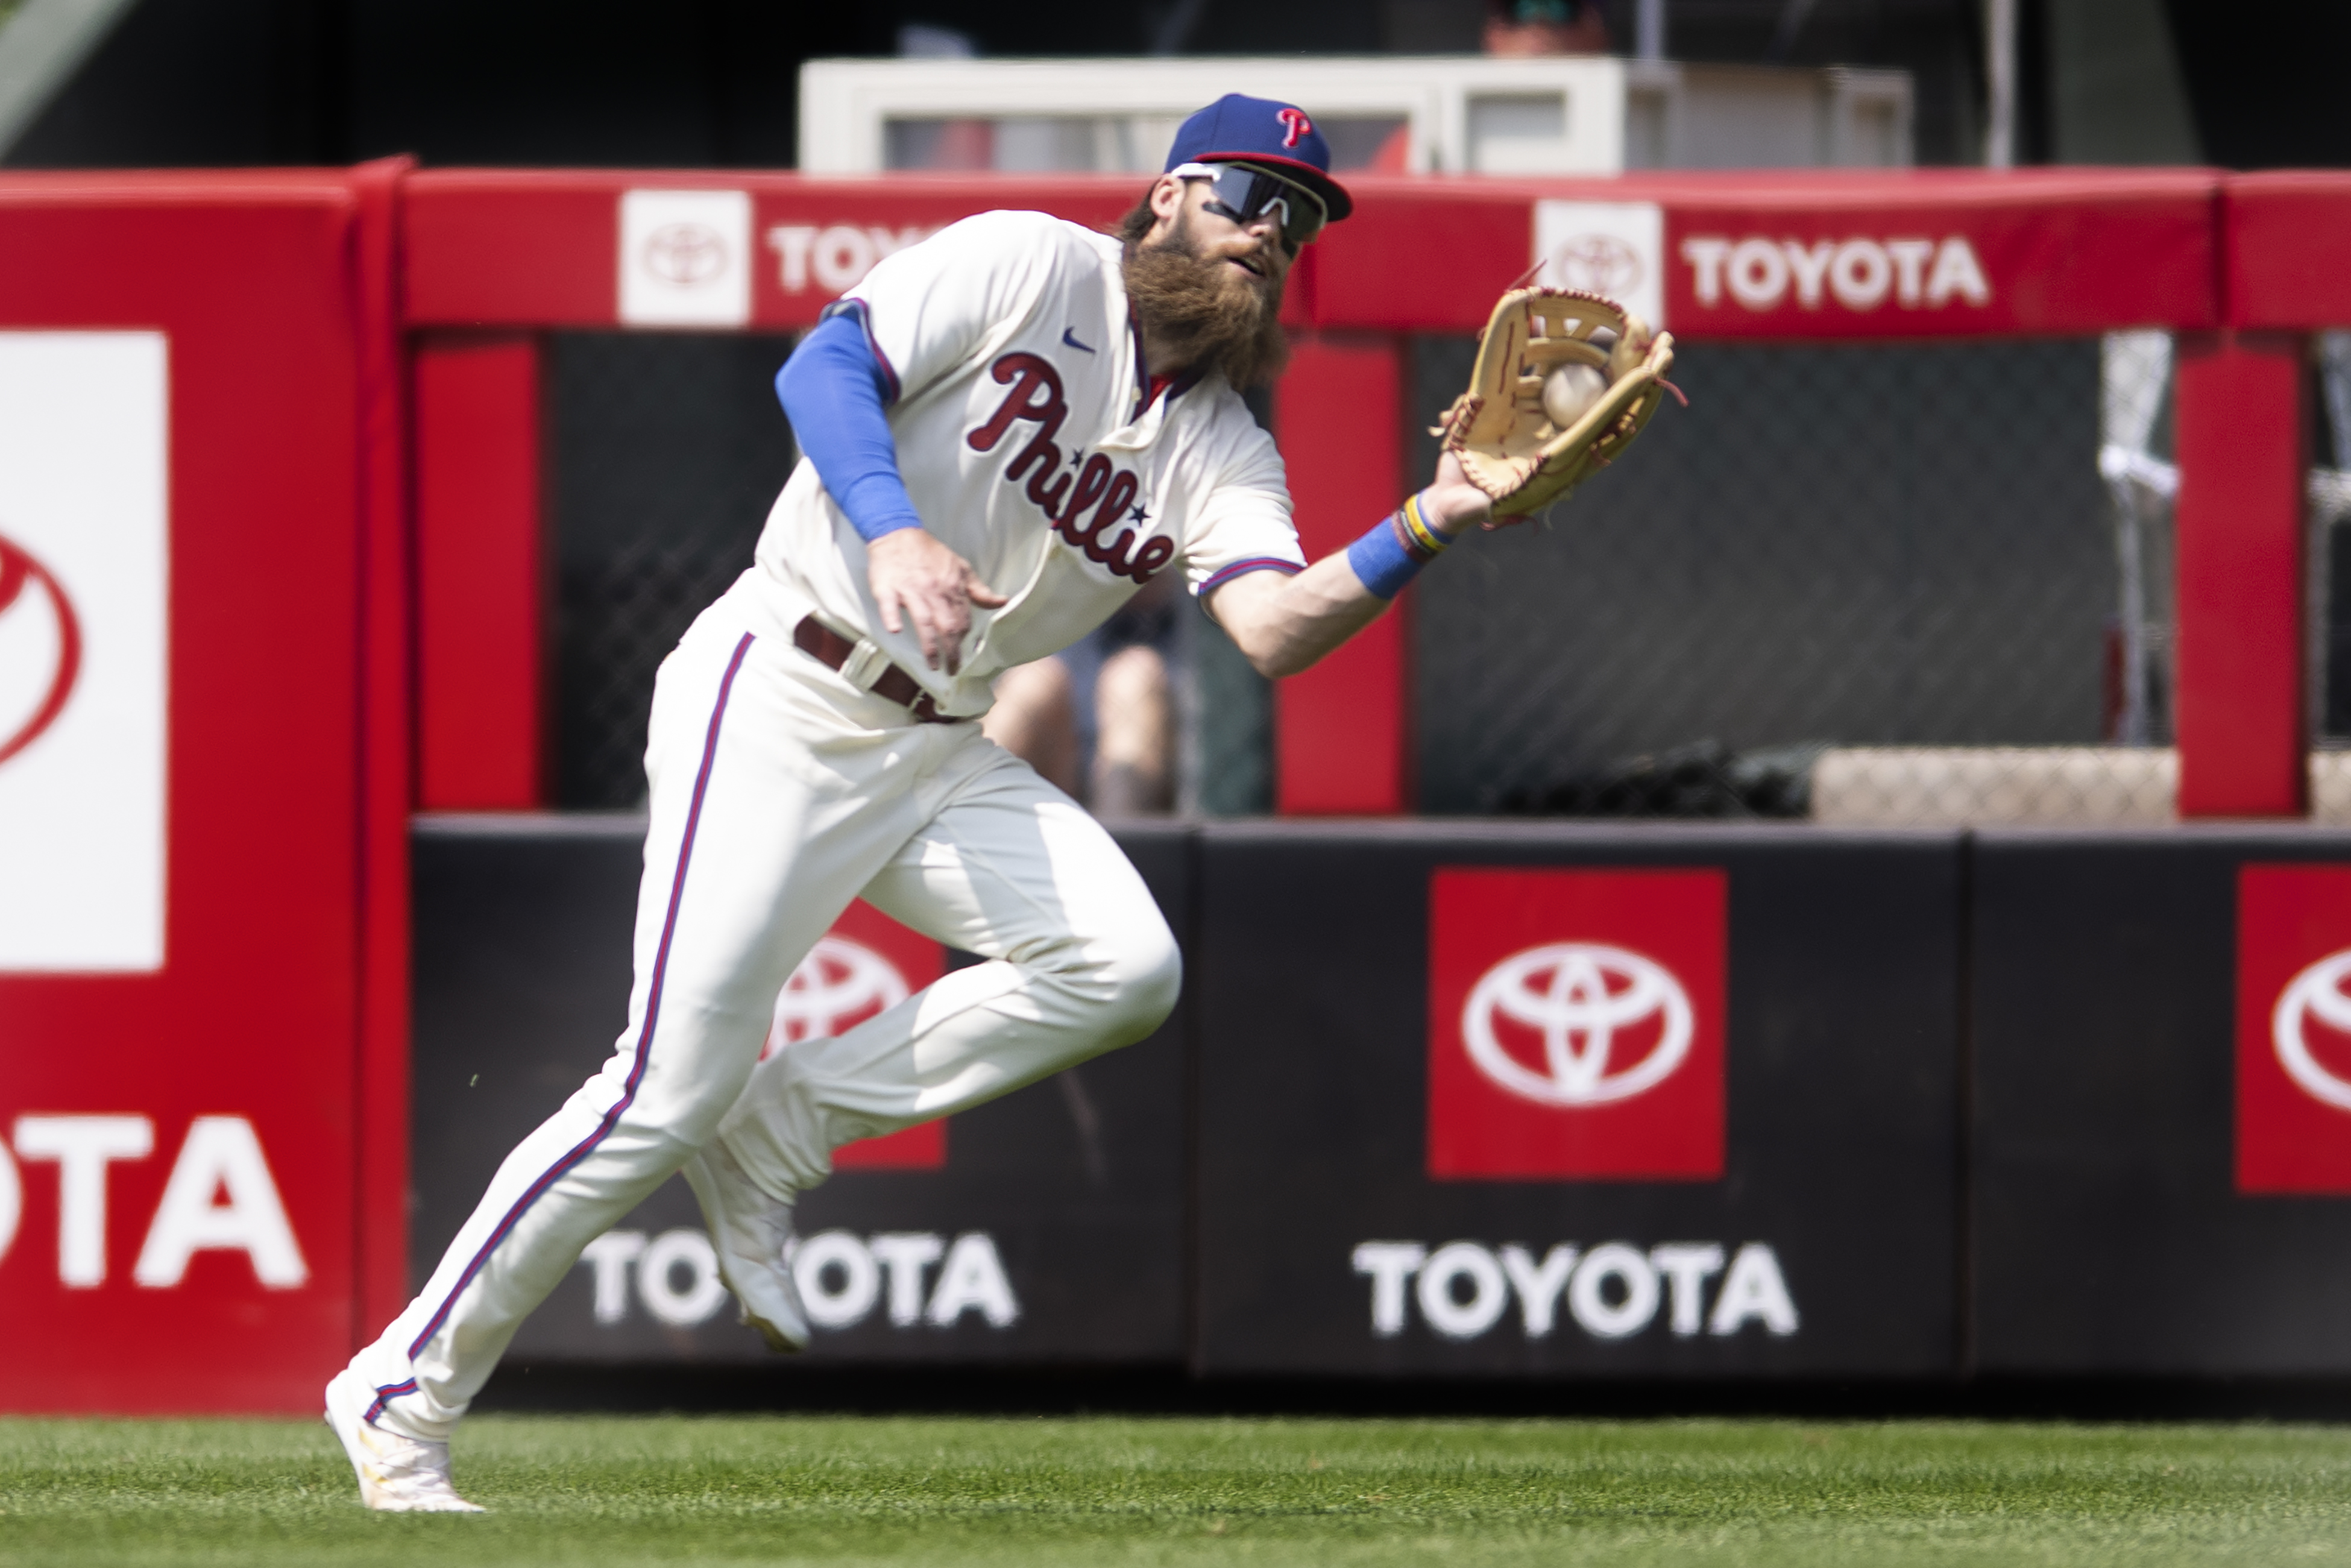 After Nimmo/Bellinger deals, Brandon Marsh trade looks even smarter   Phillies Nation - Your source for Philadelphia Phillies news, opinion,  history, rumors, events, and other fun stuff.